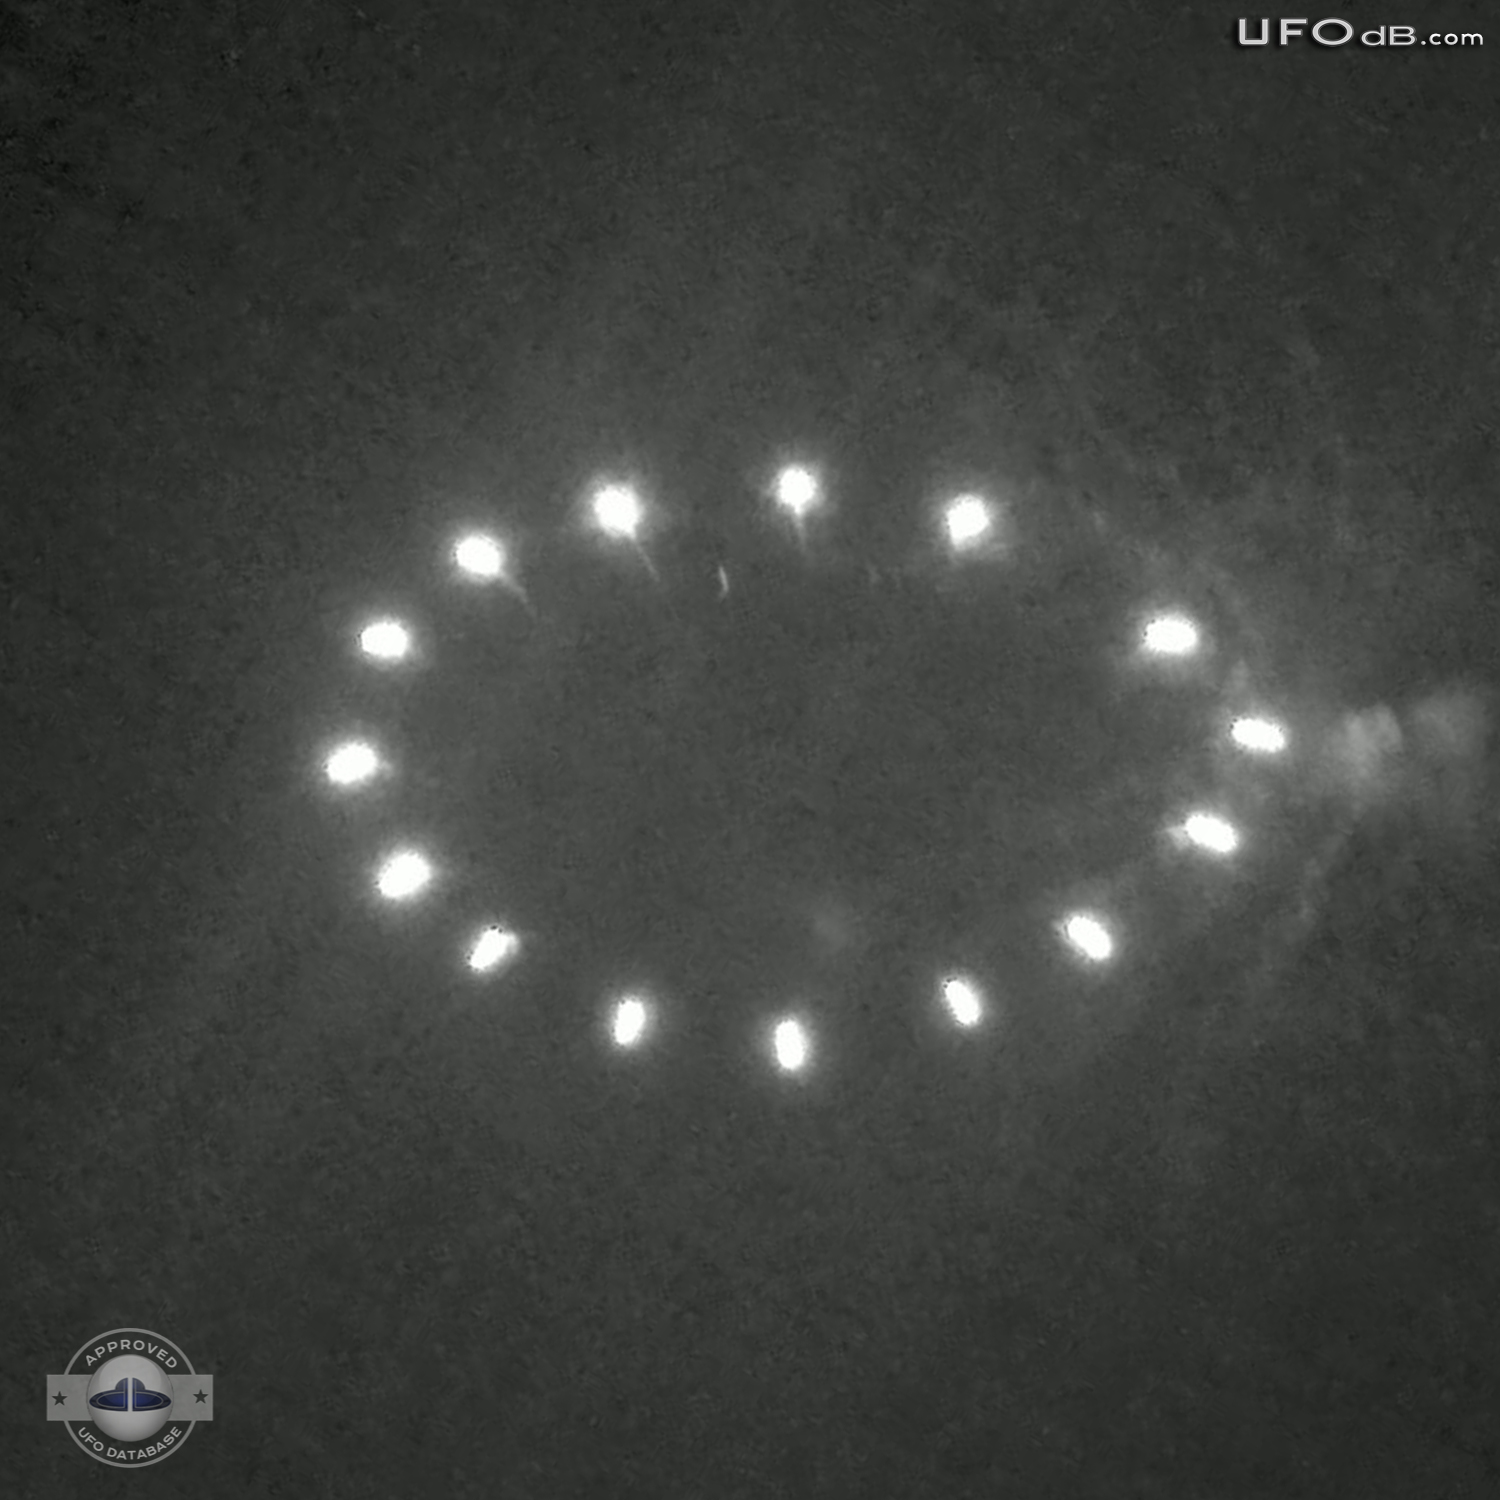 Multiple lights Saucer display a glowing ring in the night - Ranier MN UFO Picture #346-3